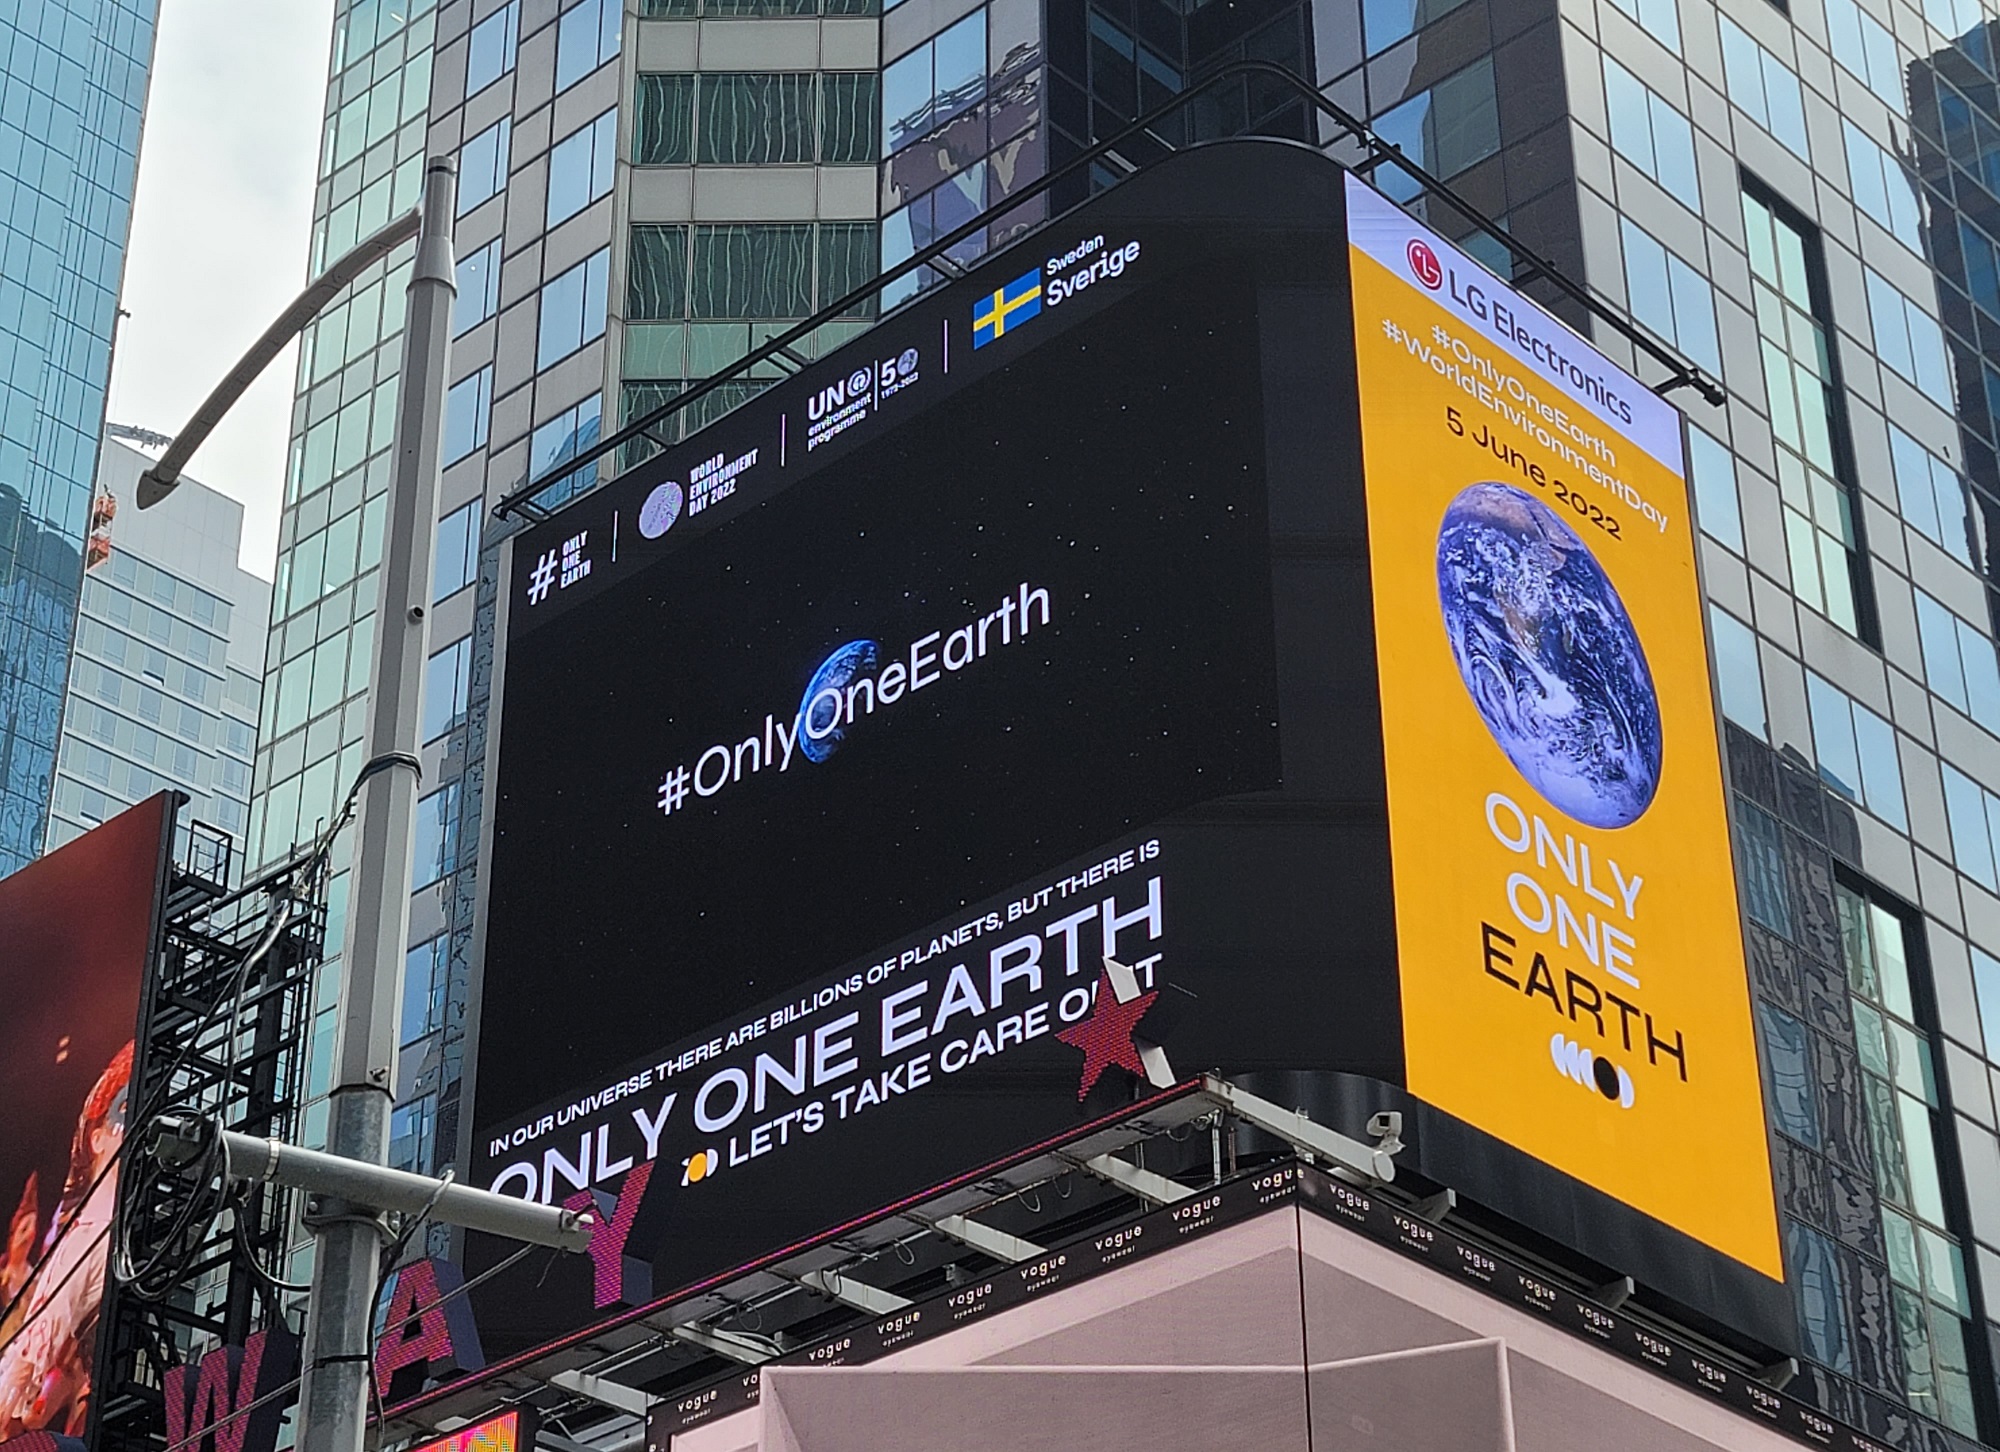 LG's digital billboard in Time Square, New York displaying a video of LG's Only One Earth campaign